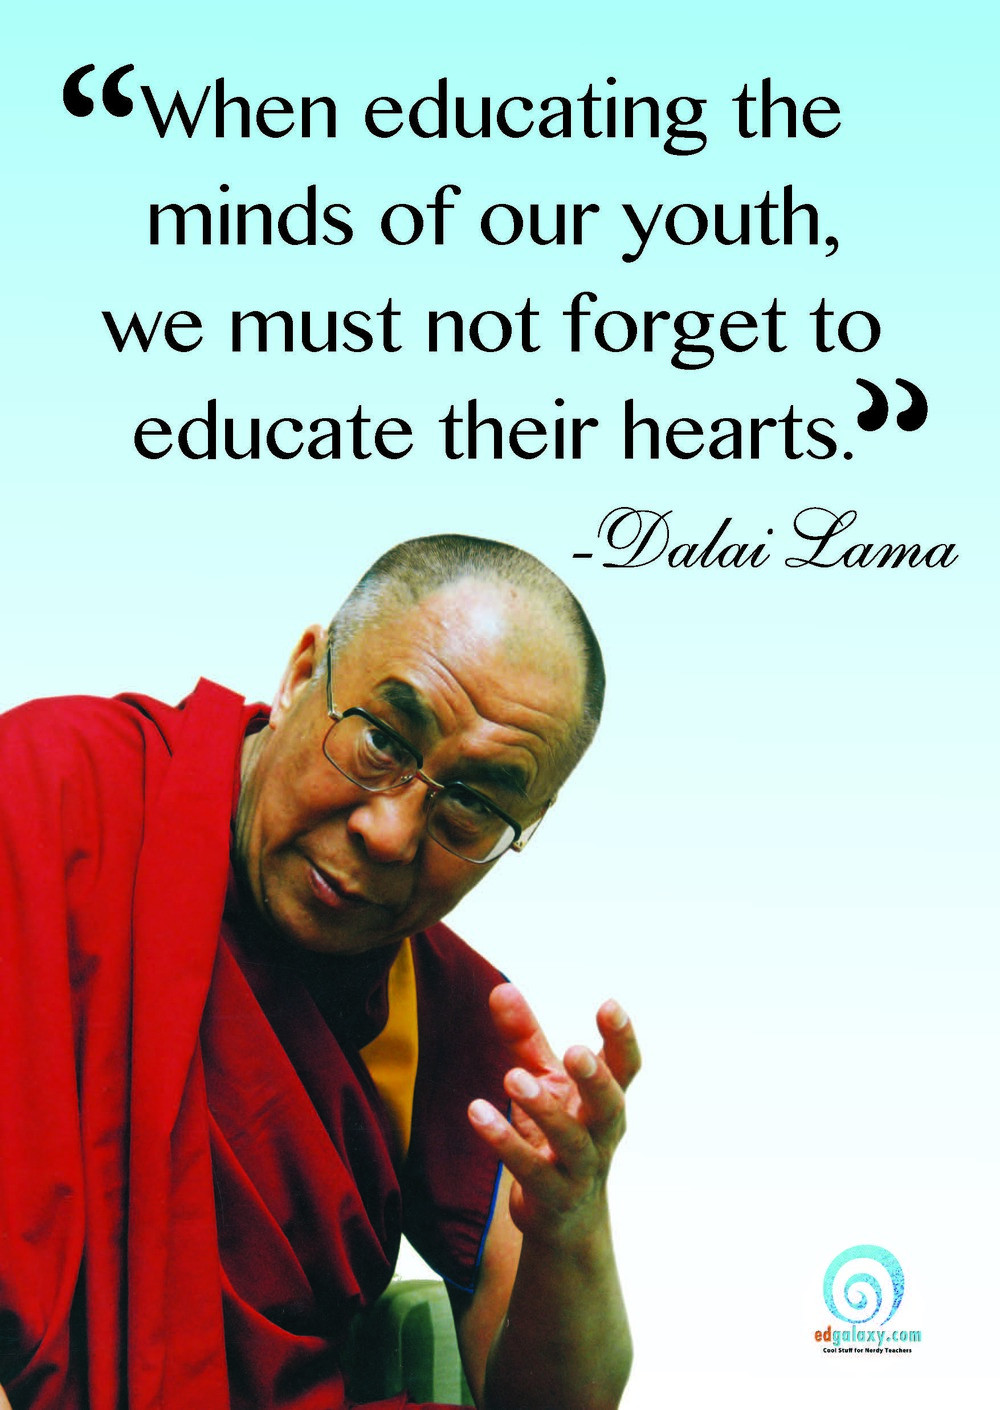 Inspiration Quotes About Education
 Education Quotes Famous Quotes for teachers and Students